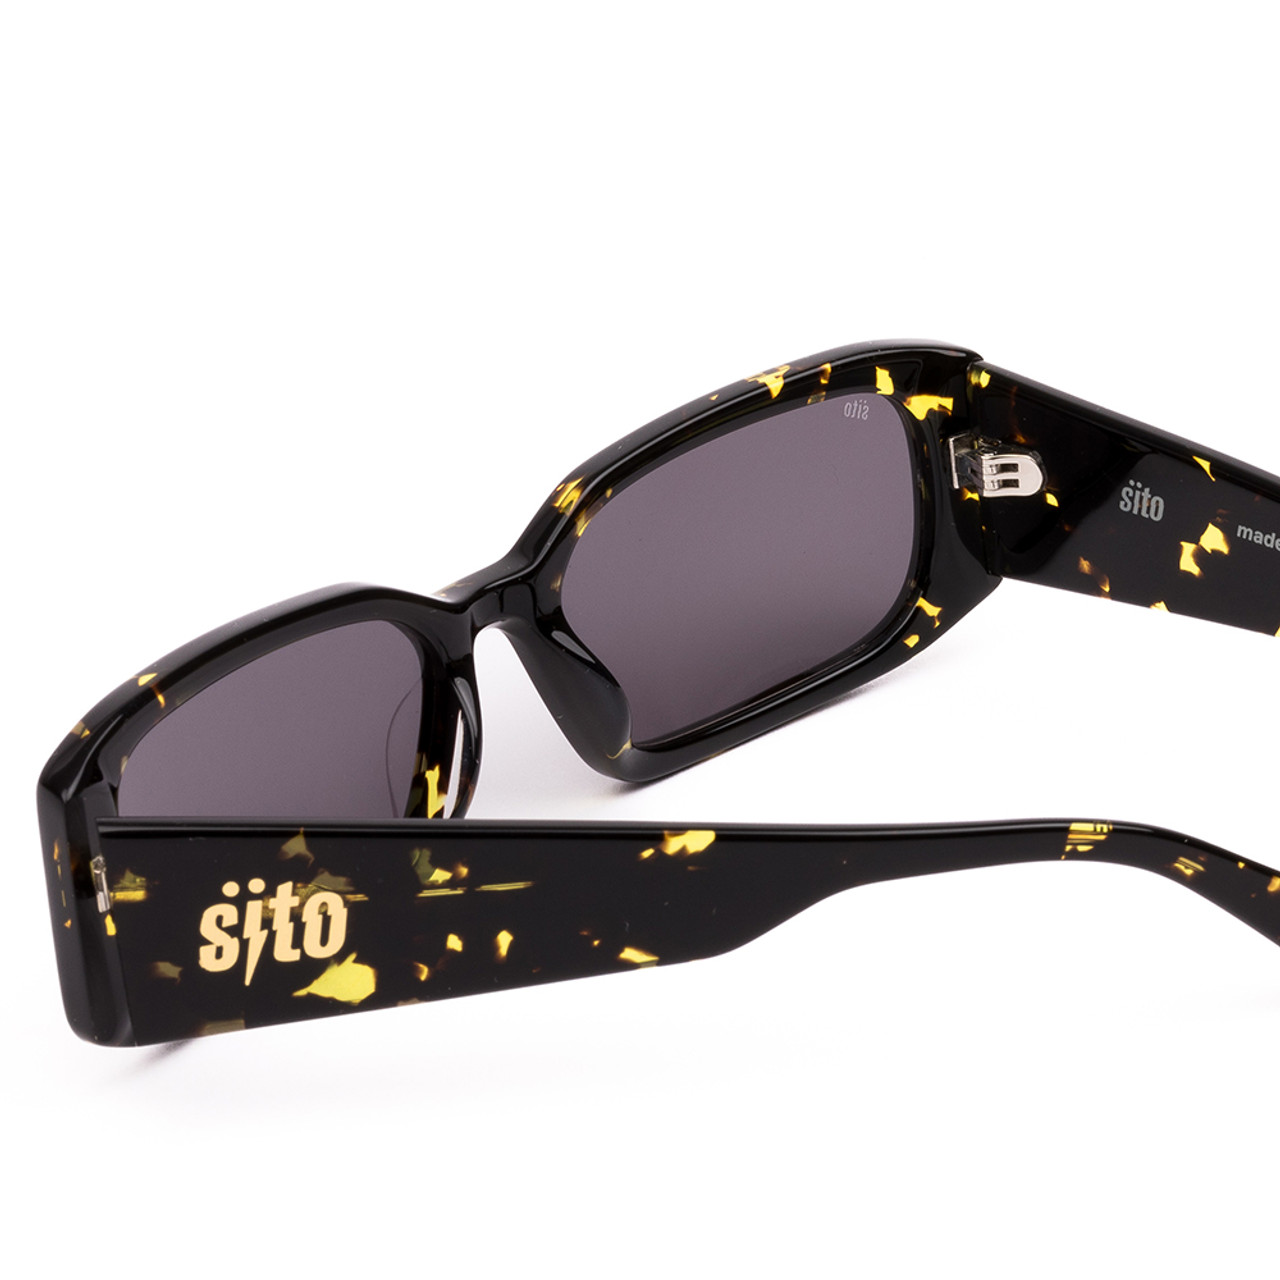 Close Up View of SITO SHADES ELECTRO VISION Unisex Sunglass Black Yellow Tortoise/Iron Gray 56 mm